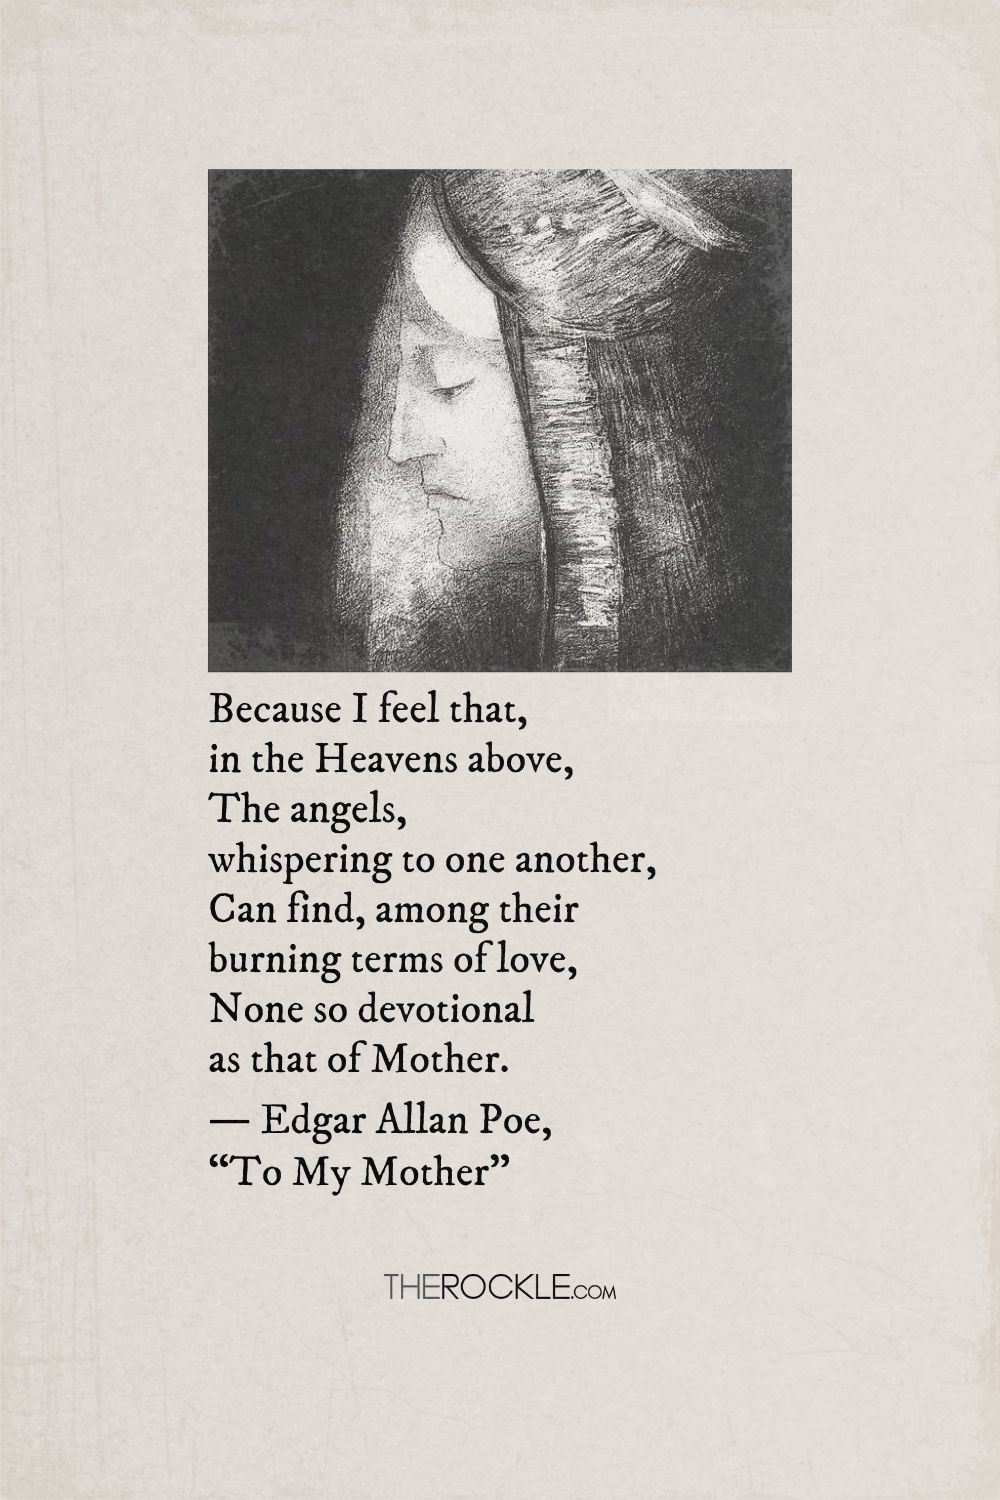 Poe's quote from the poem To My Mother